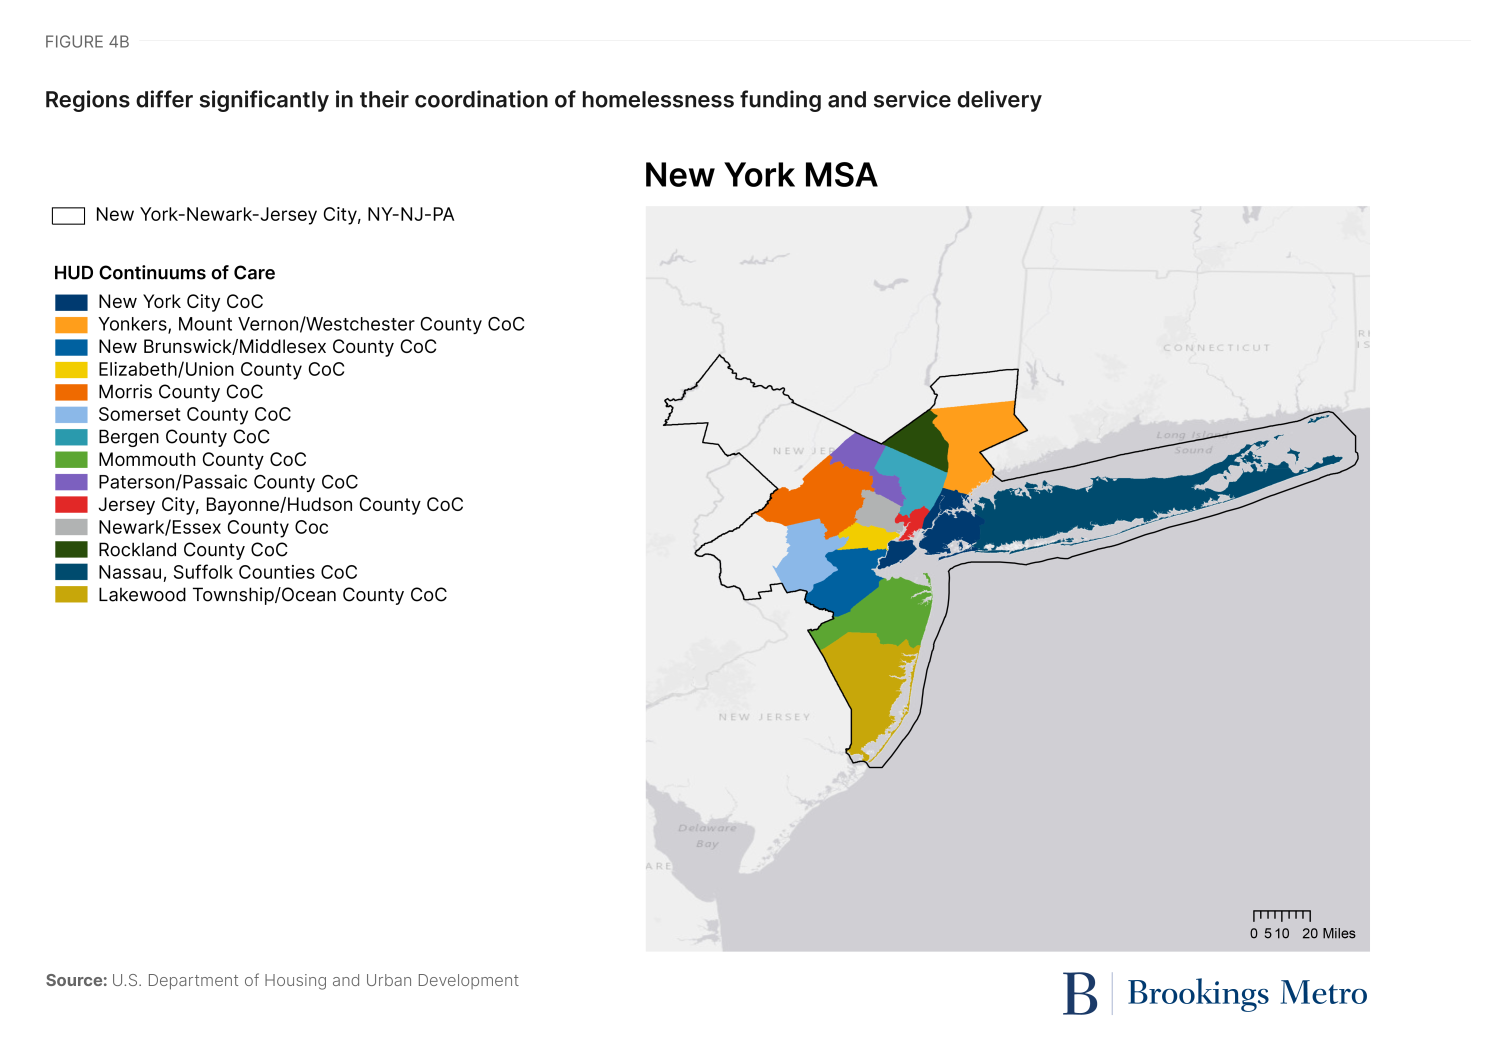 Figure 4. Regions differ significantly in their coordination of homelessness funding and service delivery - New York